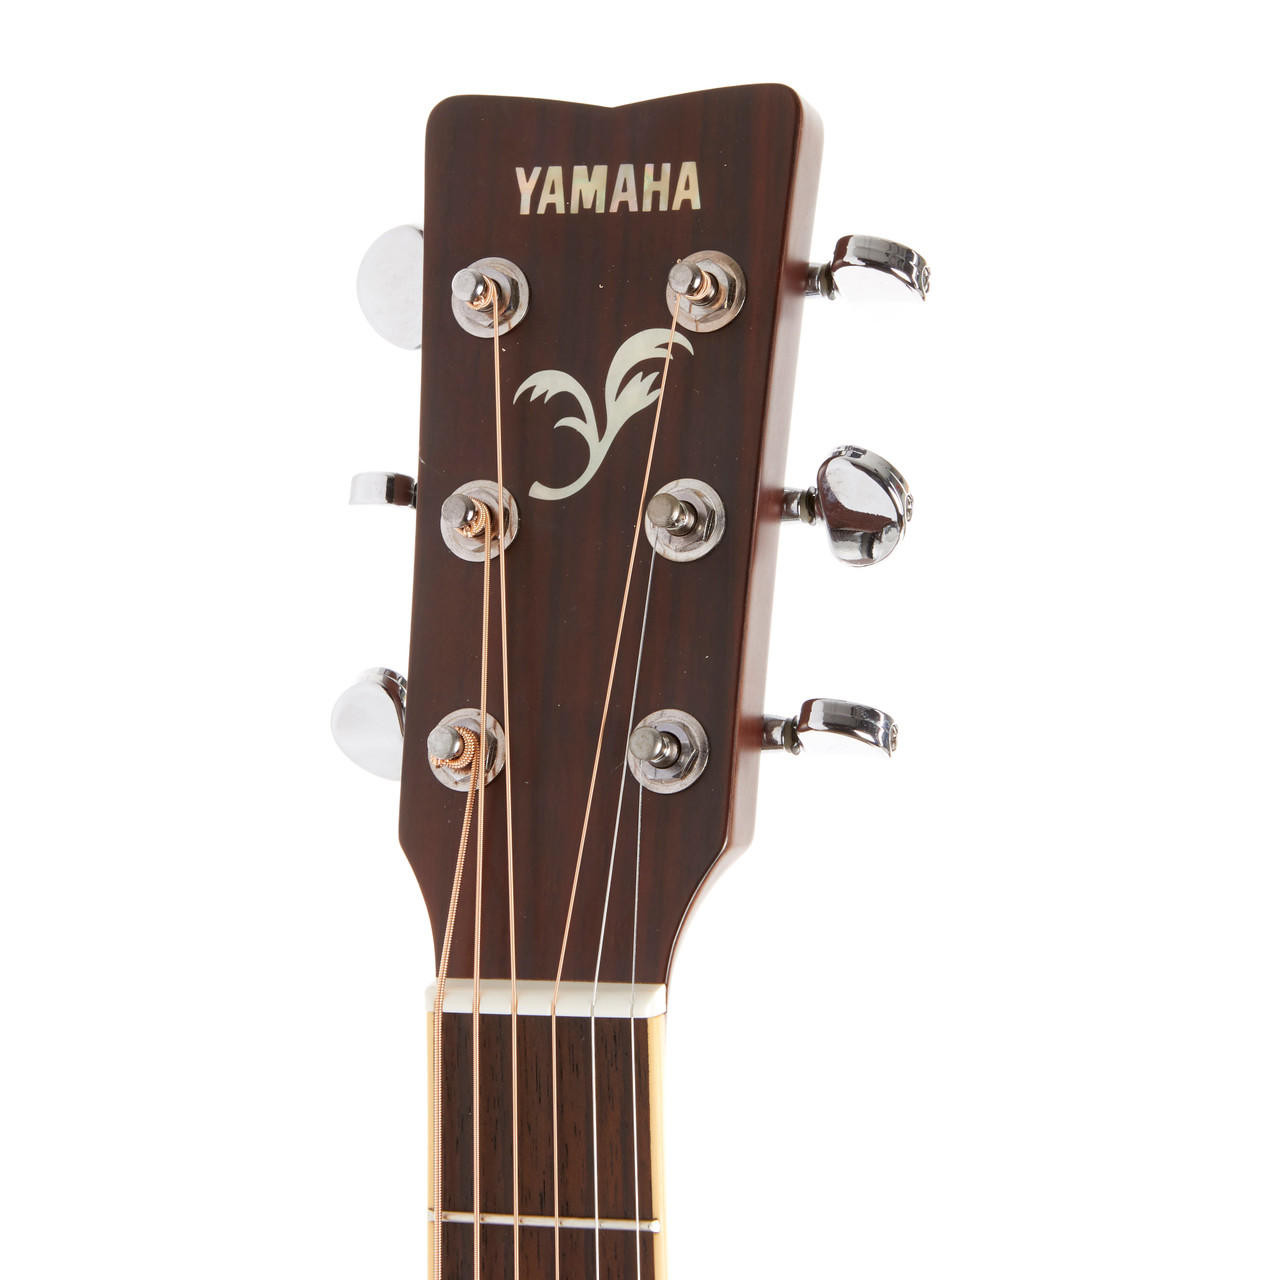 What Gauge Strings Come On Yamaha Acoustic Guitars